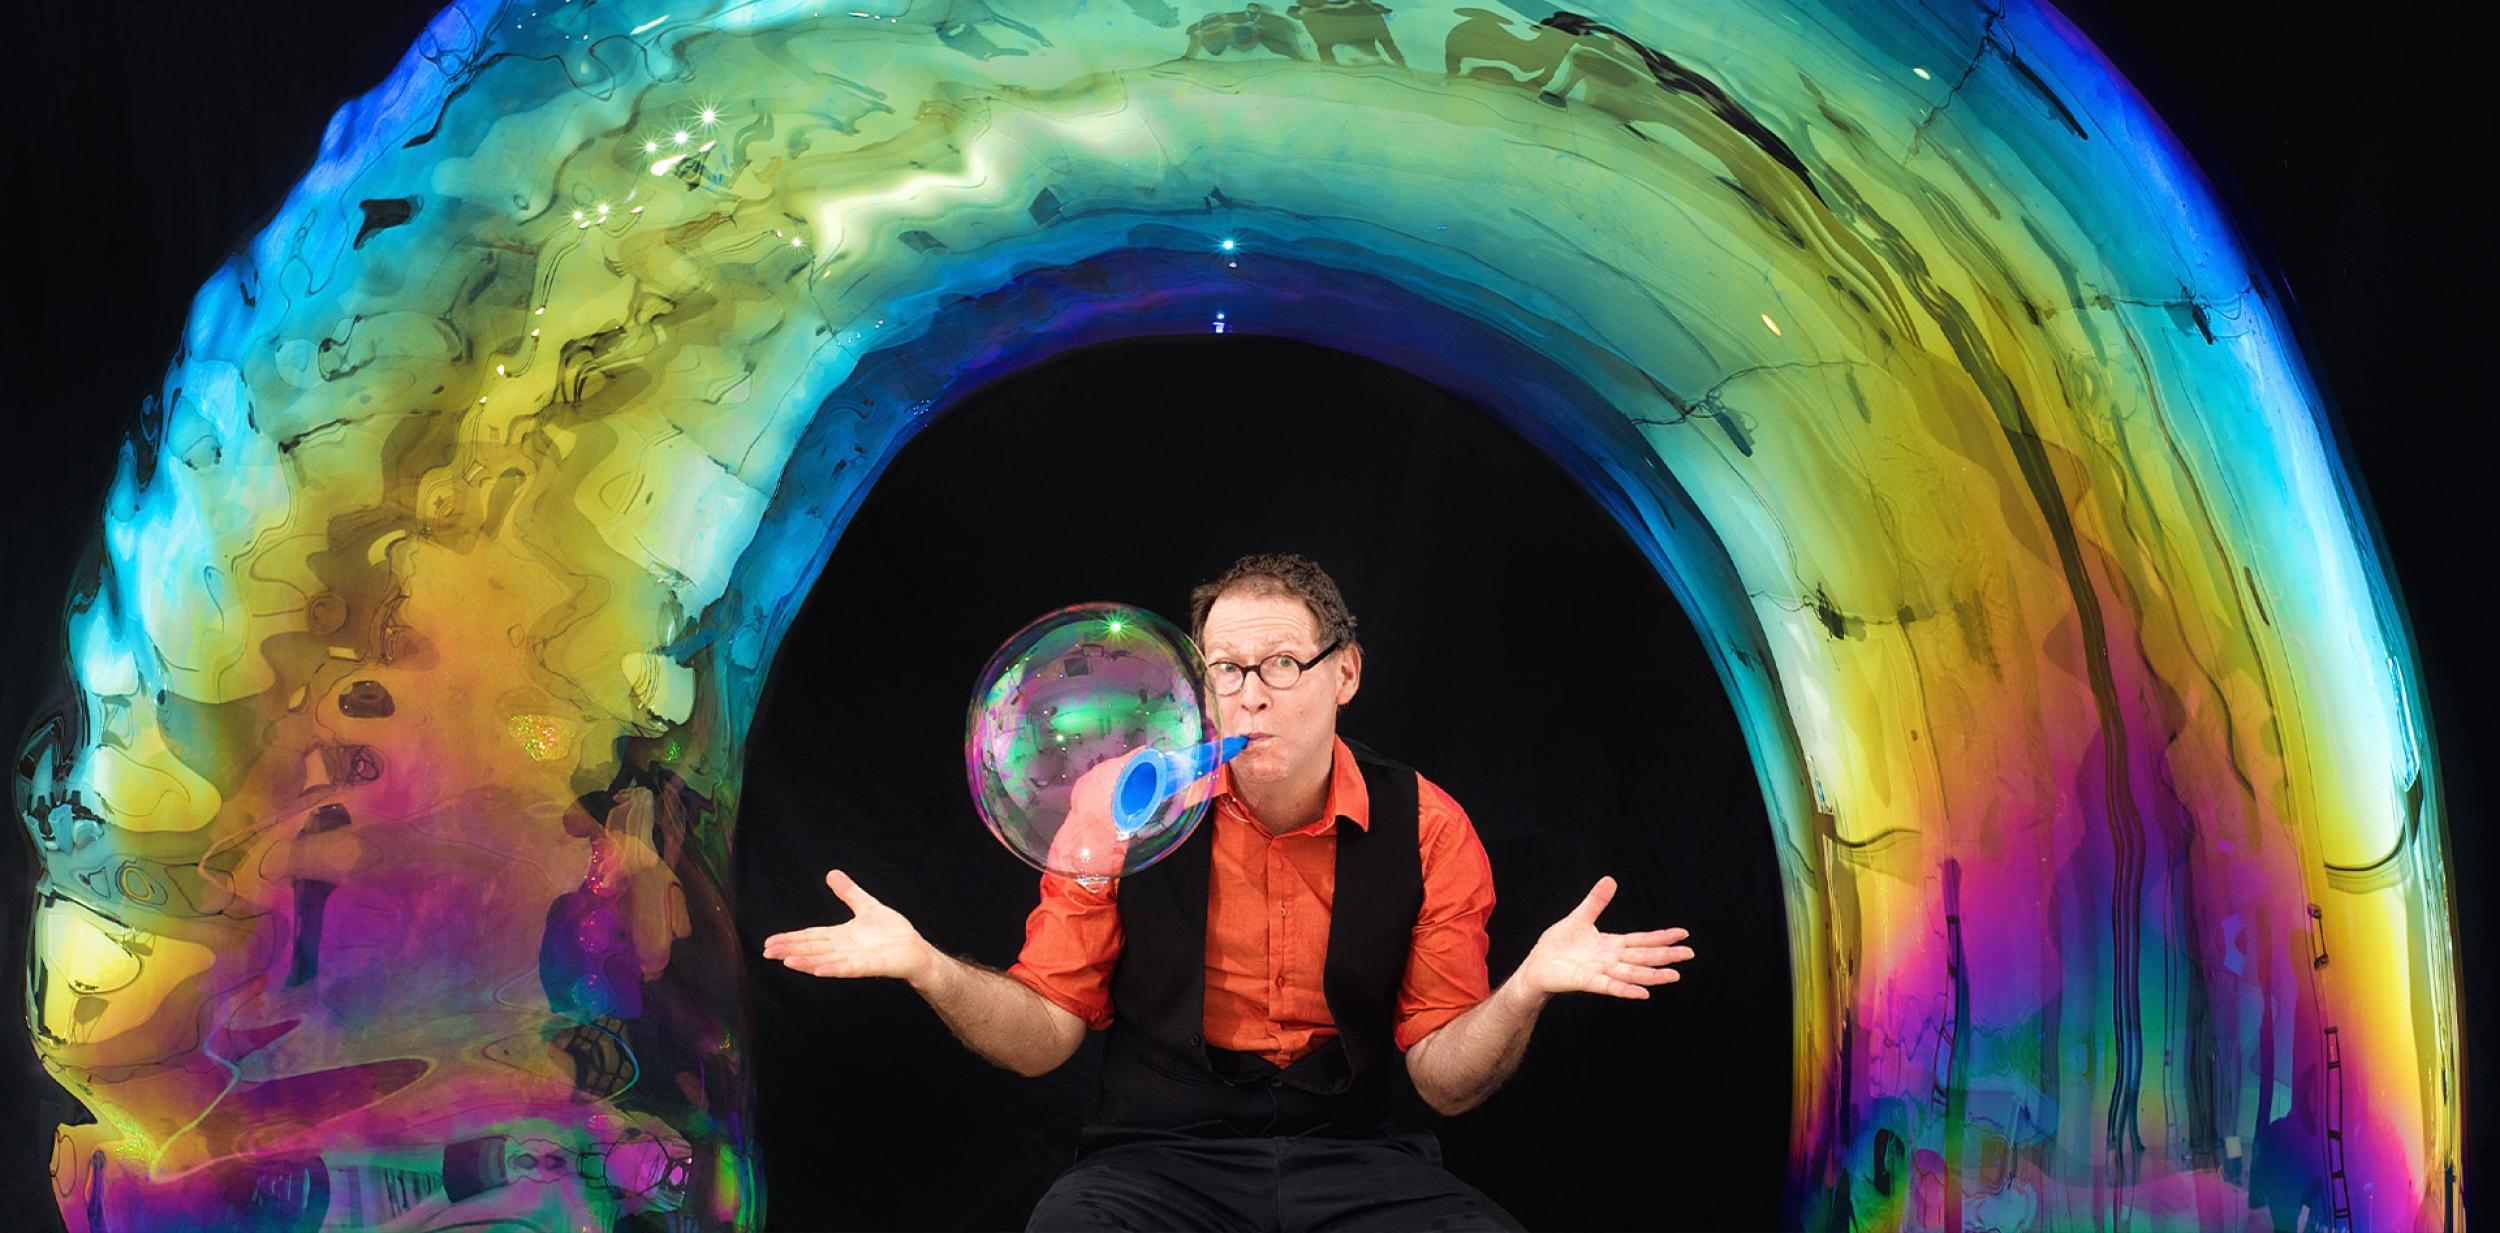 A person blowing a large bubble